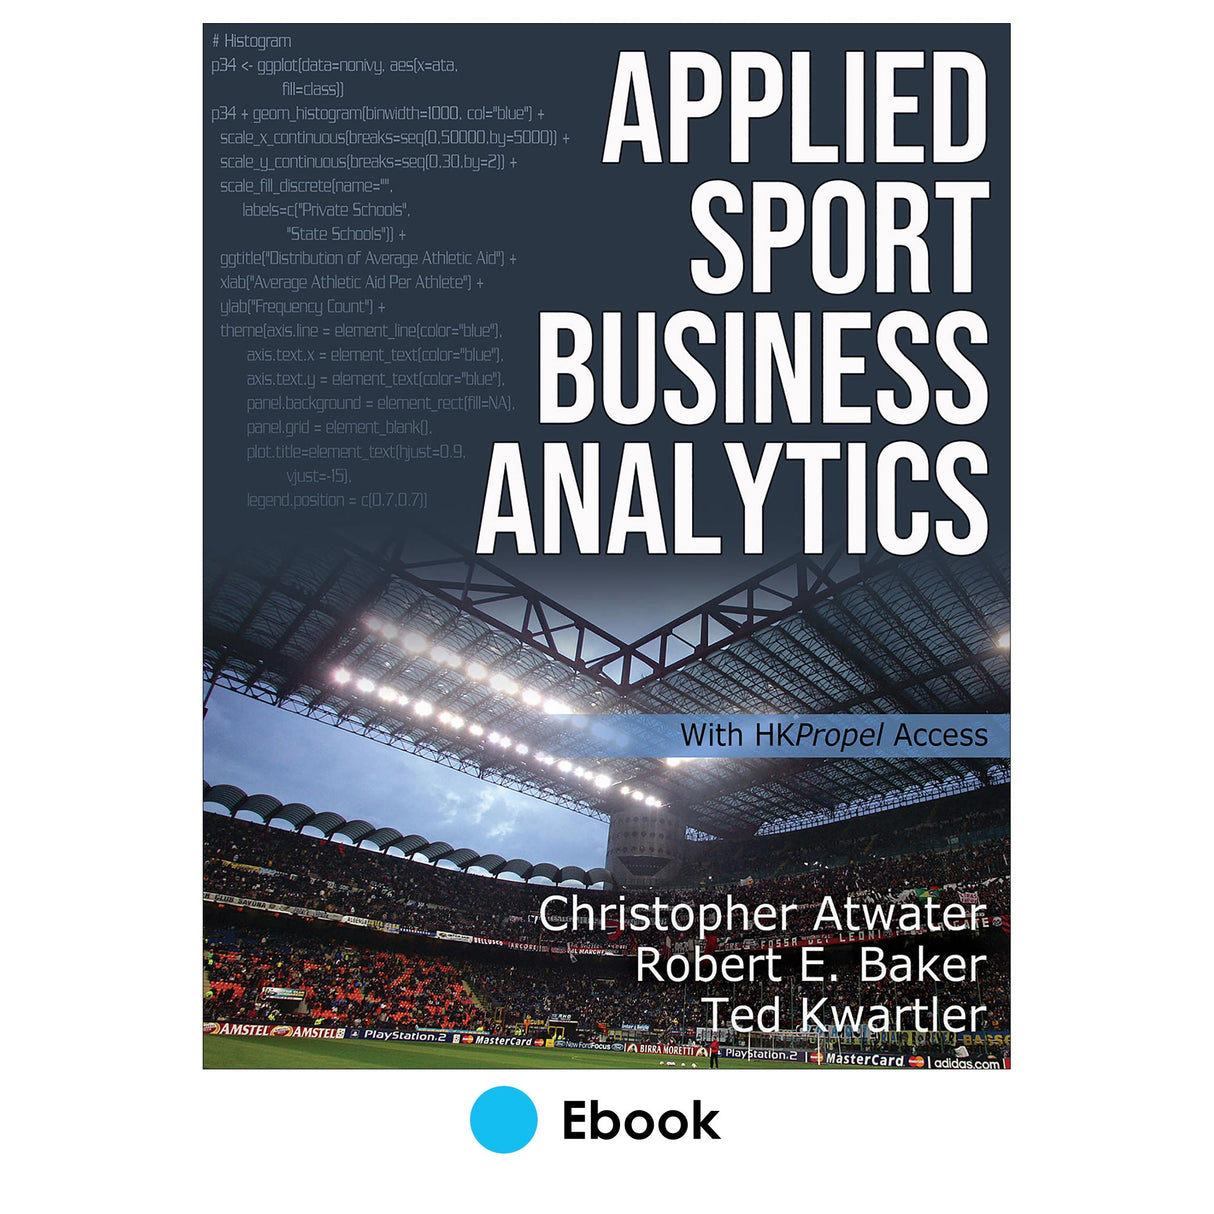 Applied Sport Business Analytics Ebook With HKPropel Access